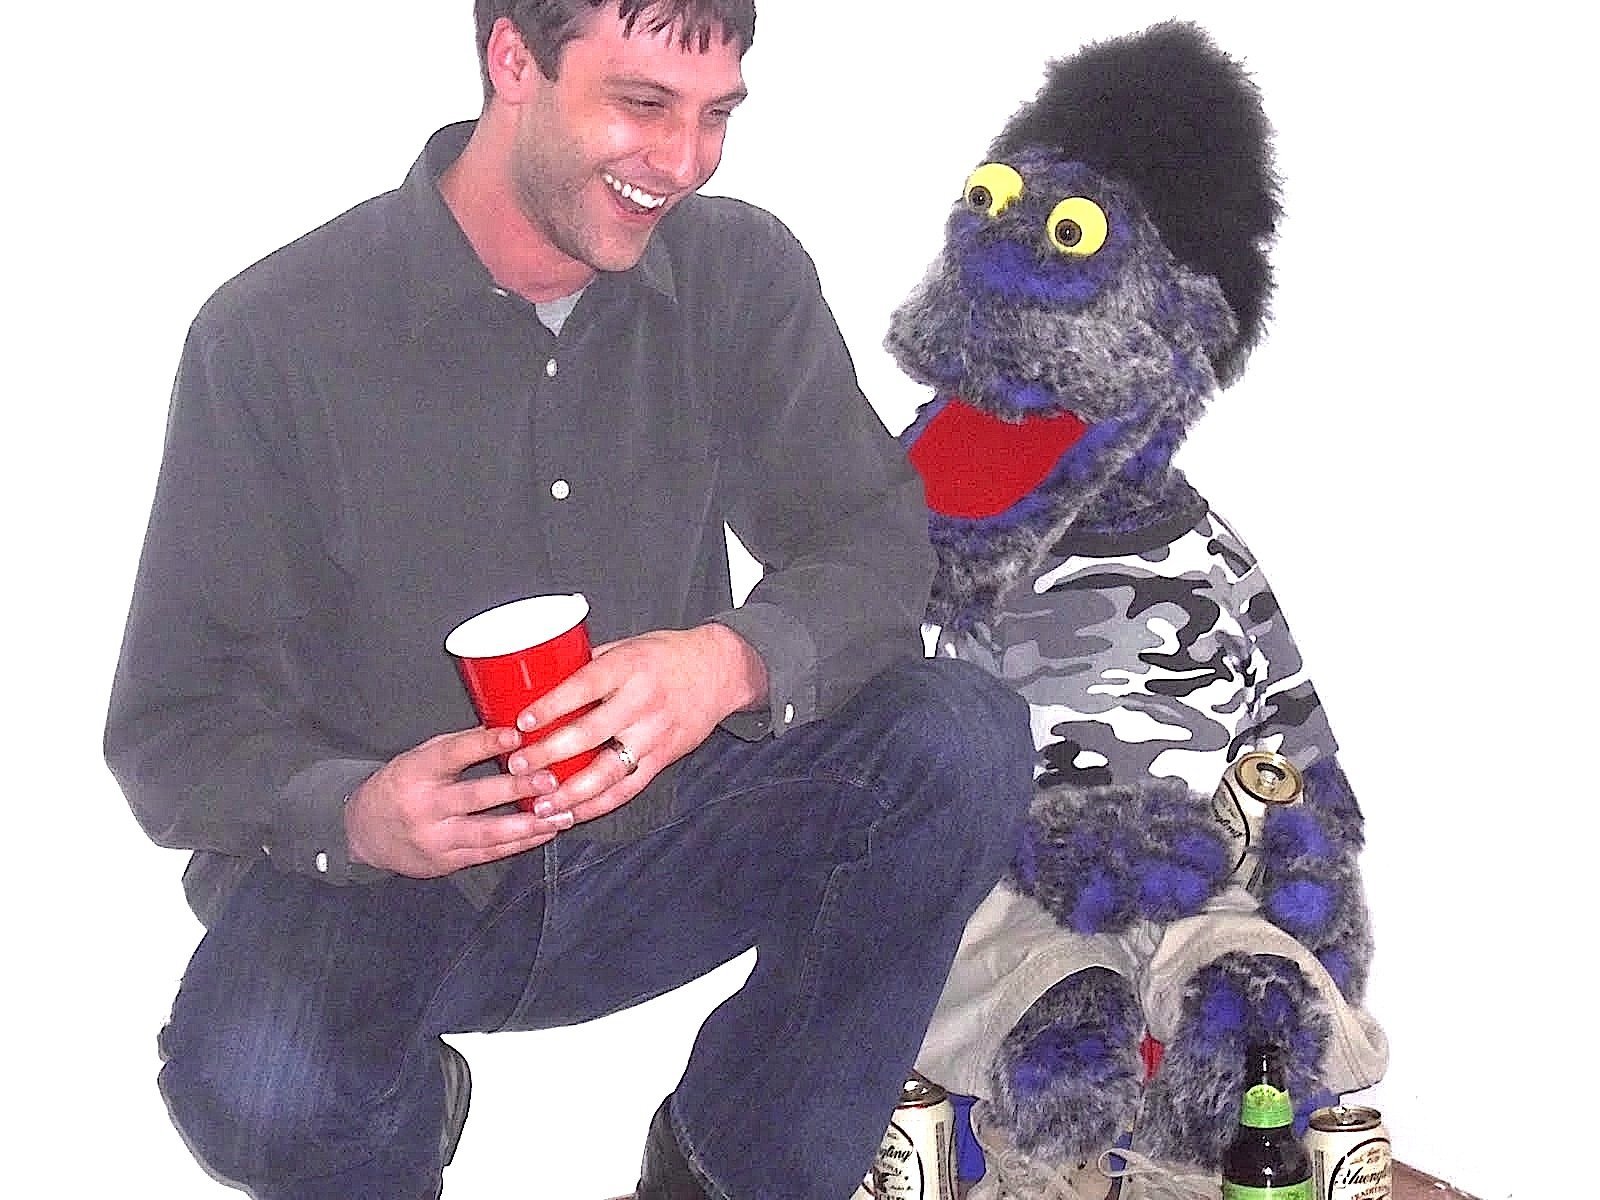 Josh And Todd: The Story Of A Man And His Puppet